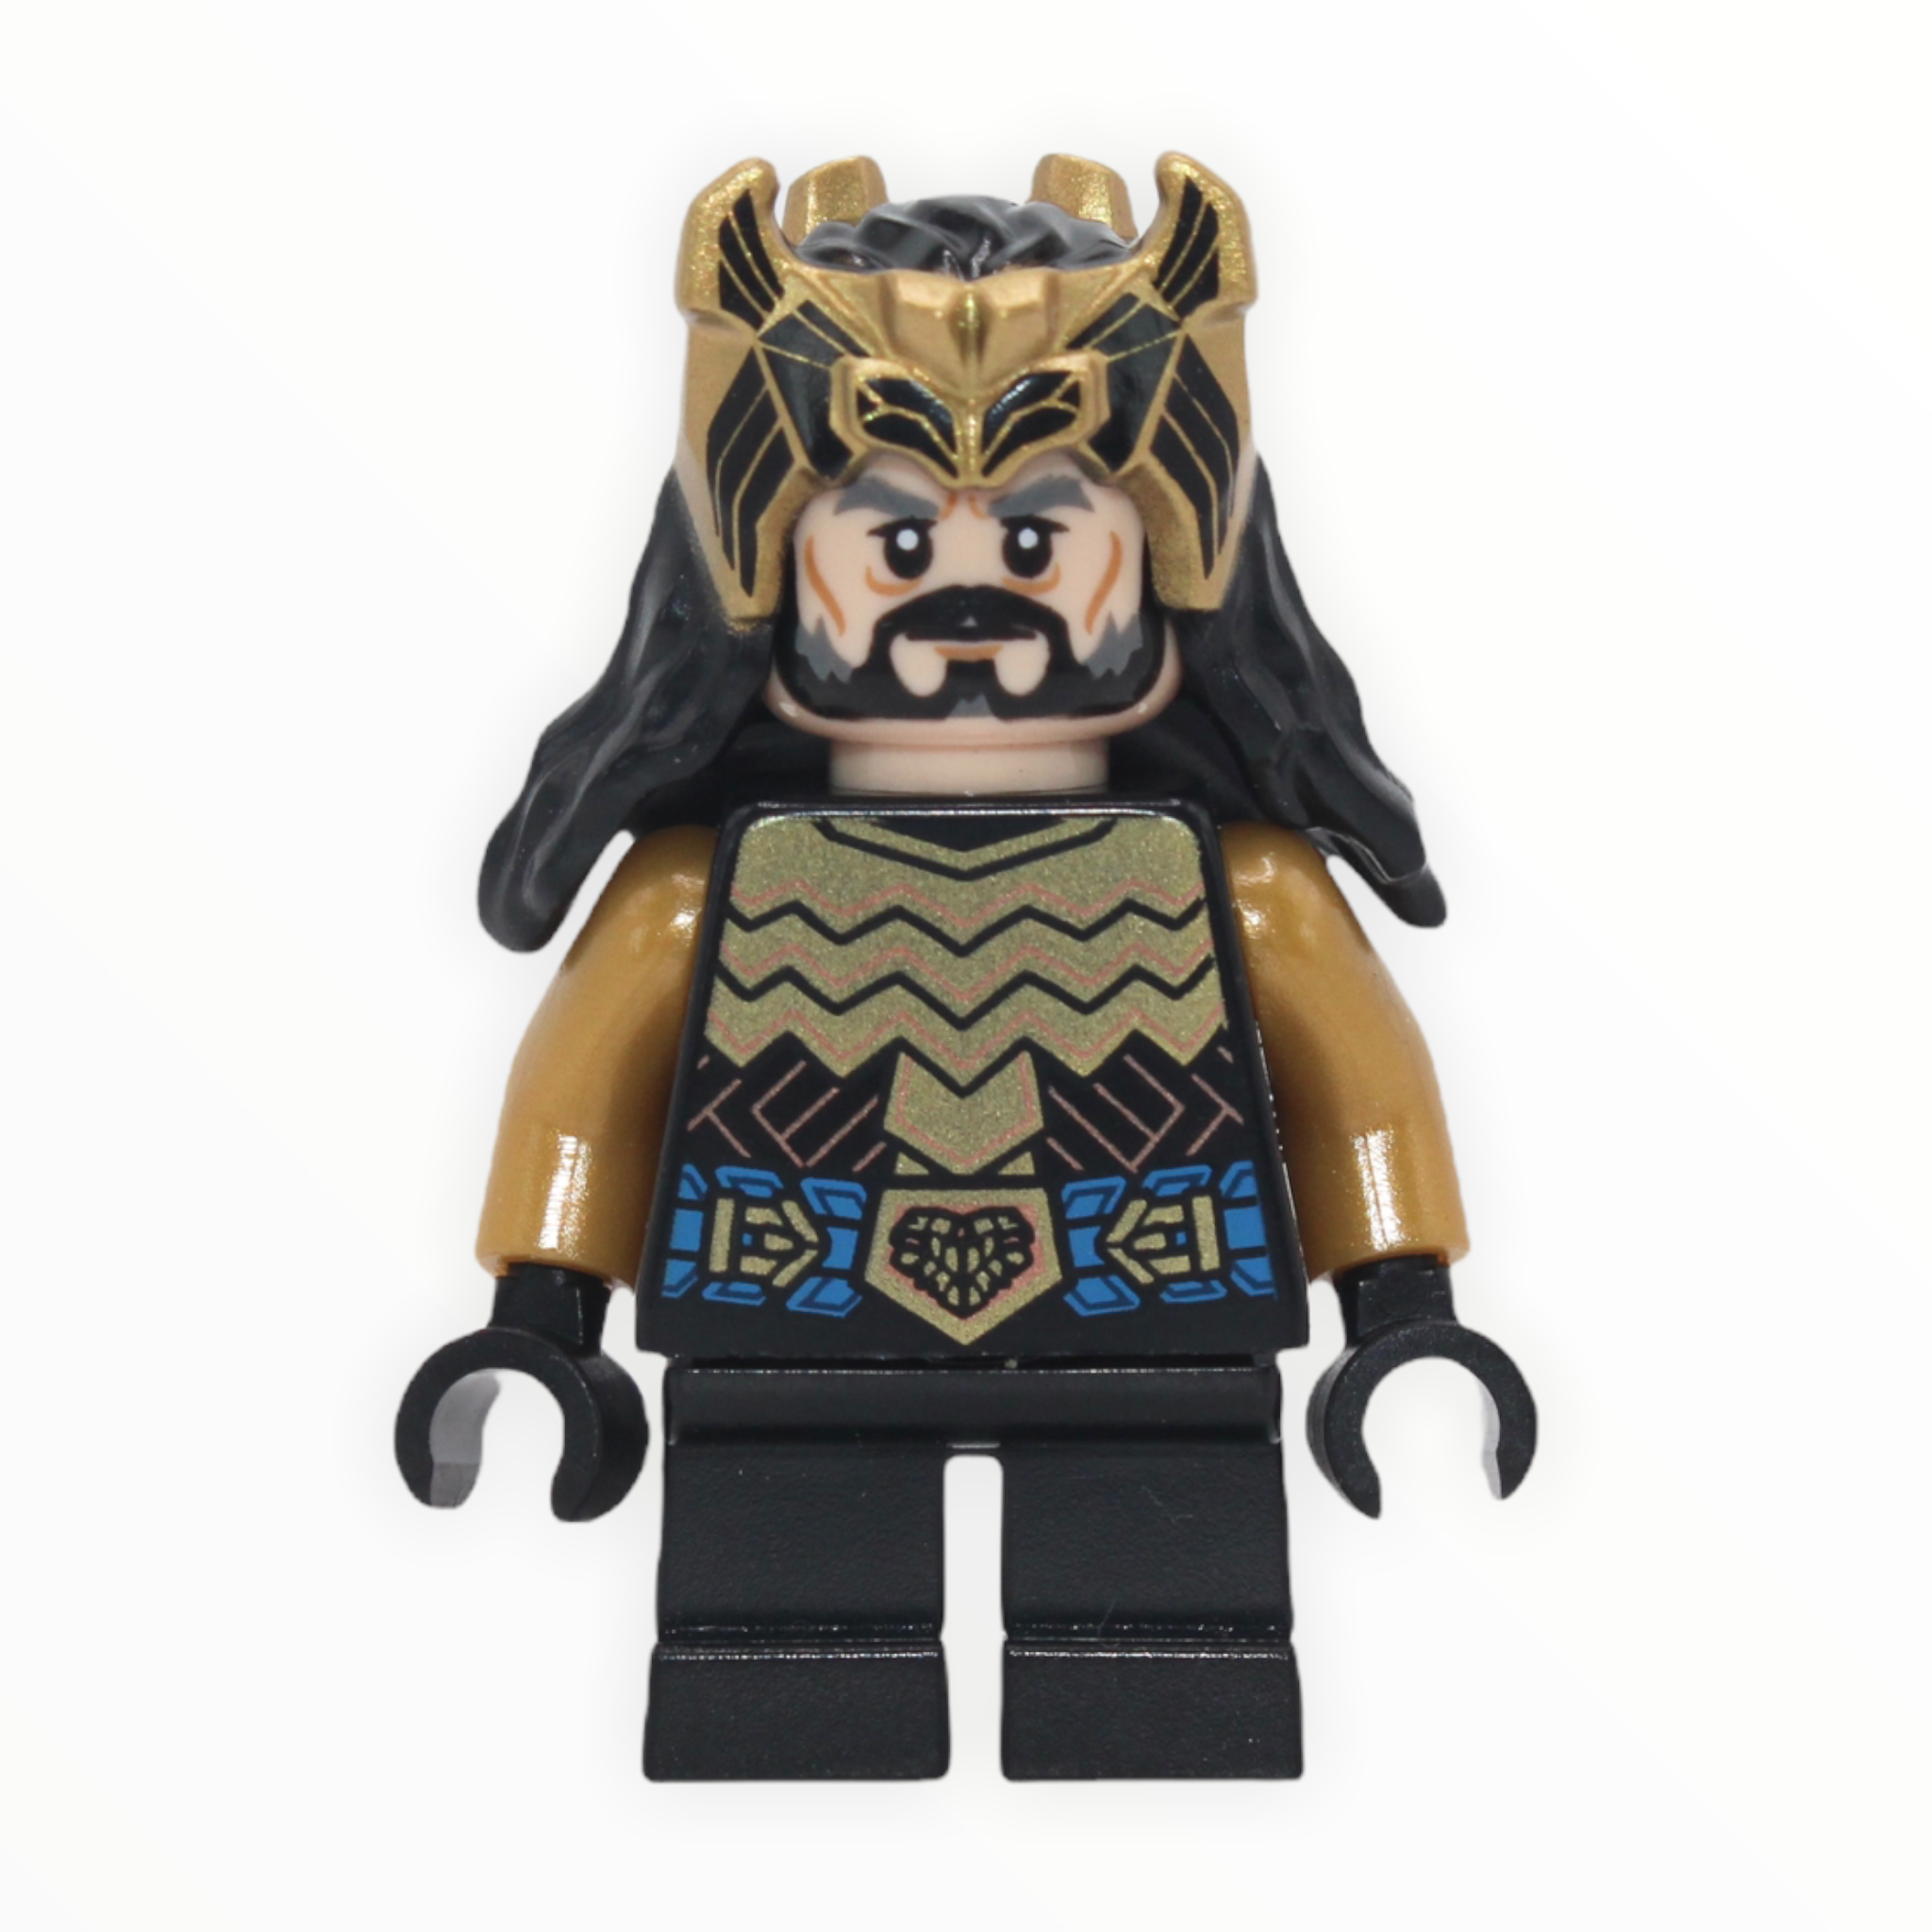 Thorin Oakenshield (gold crown and armor)